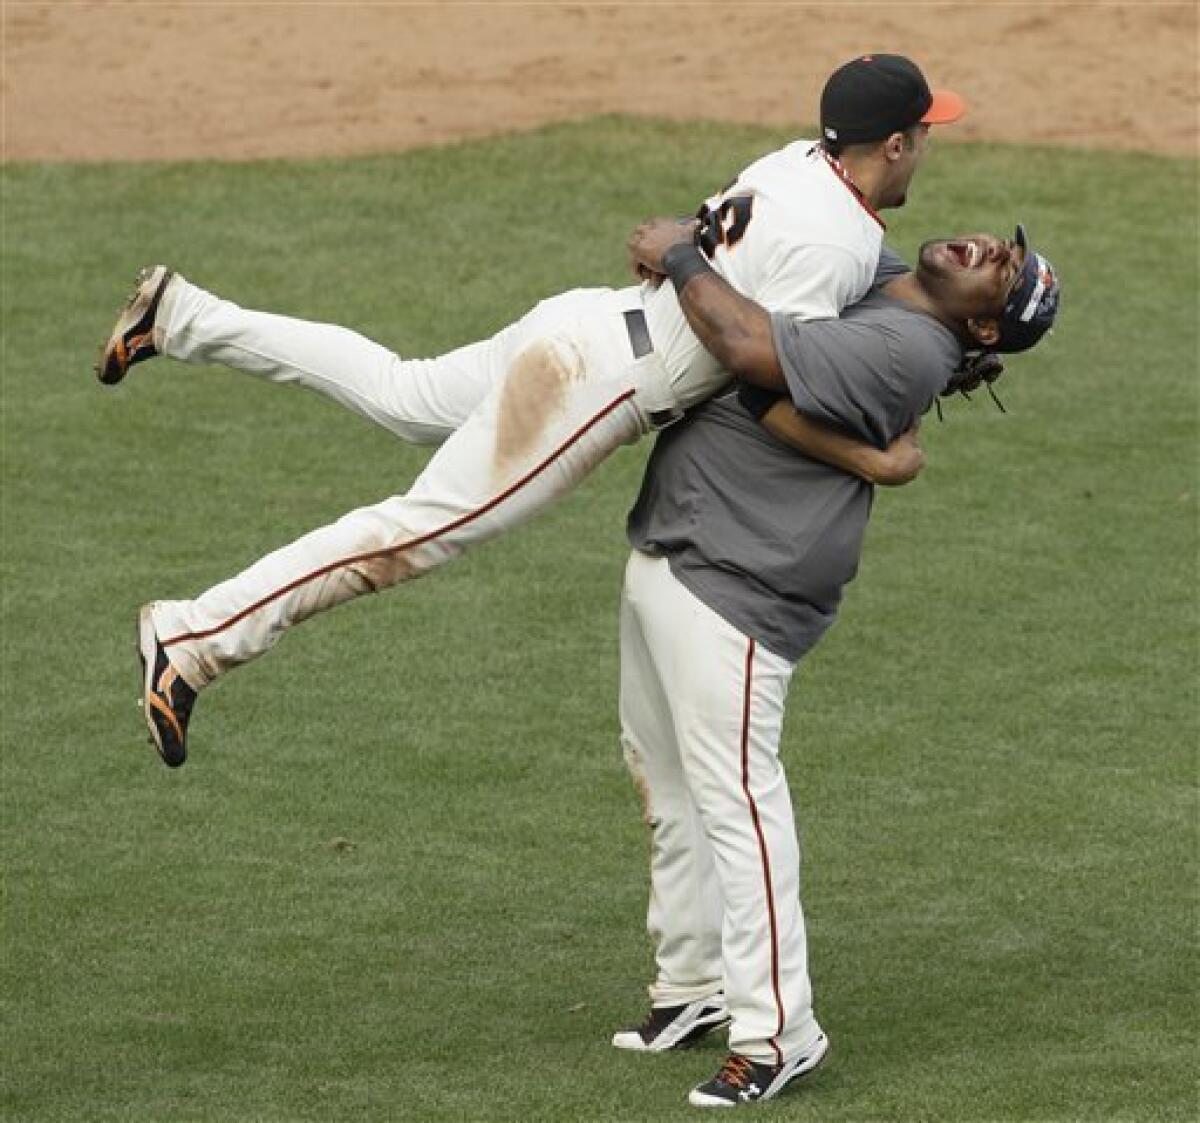 Giants clinch NL West crown by beating Padres – Times Herald Online